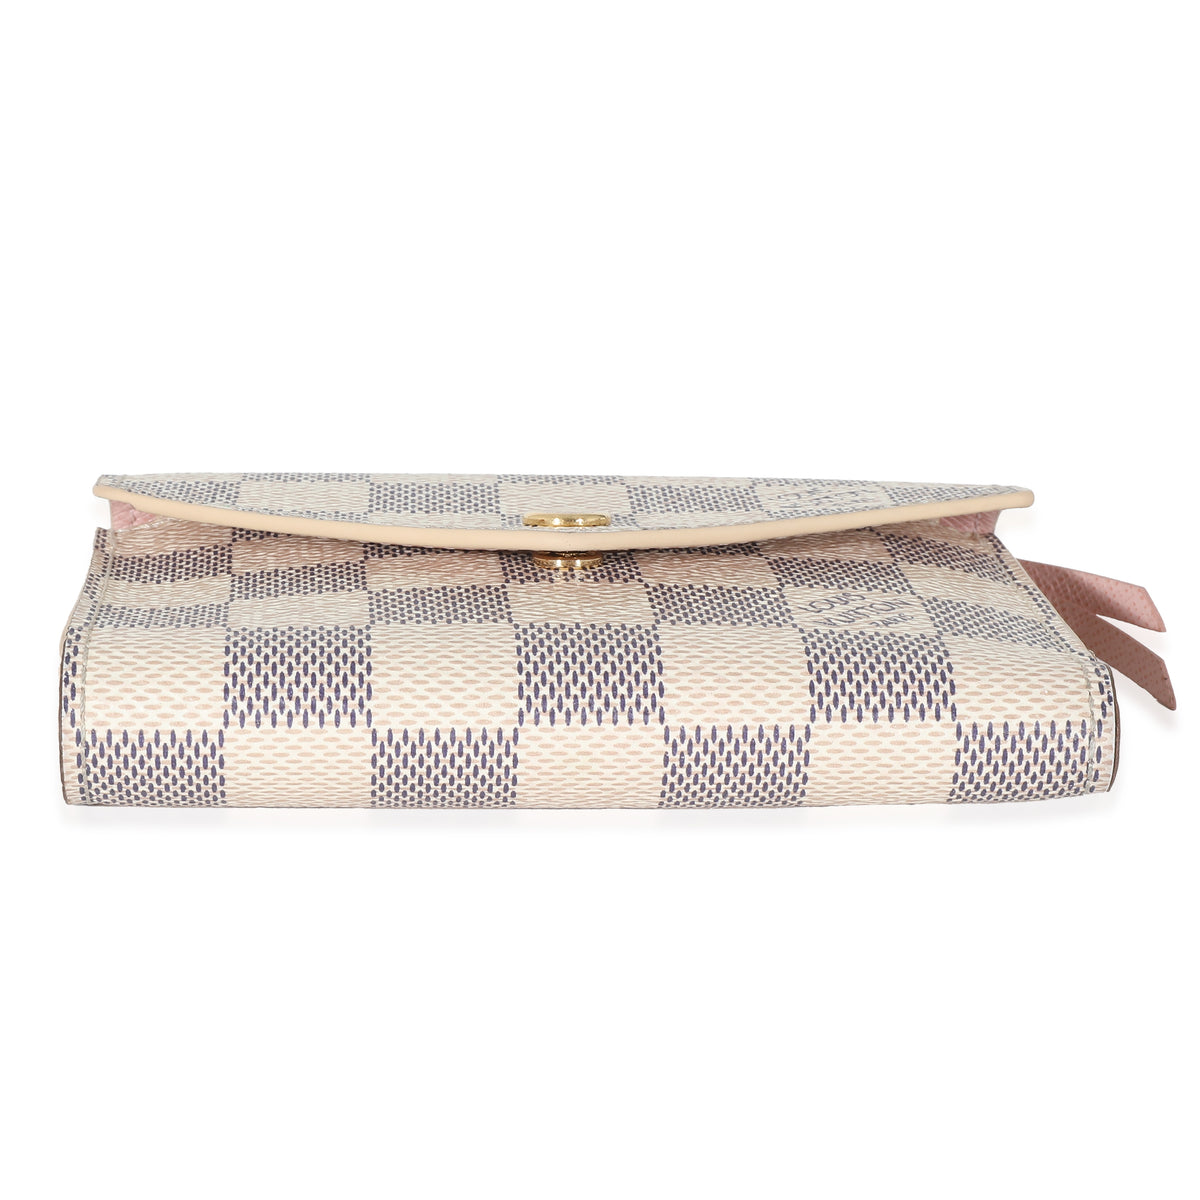 VICTORINE WALLET Damier Azur Canvas - Wallets and Small Leather Goods